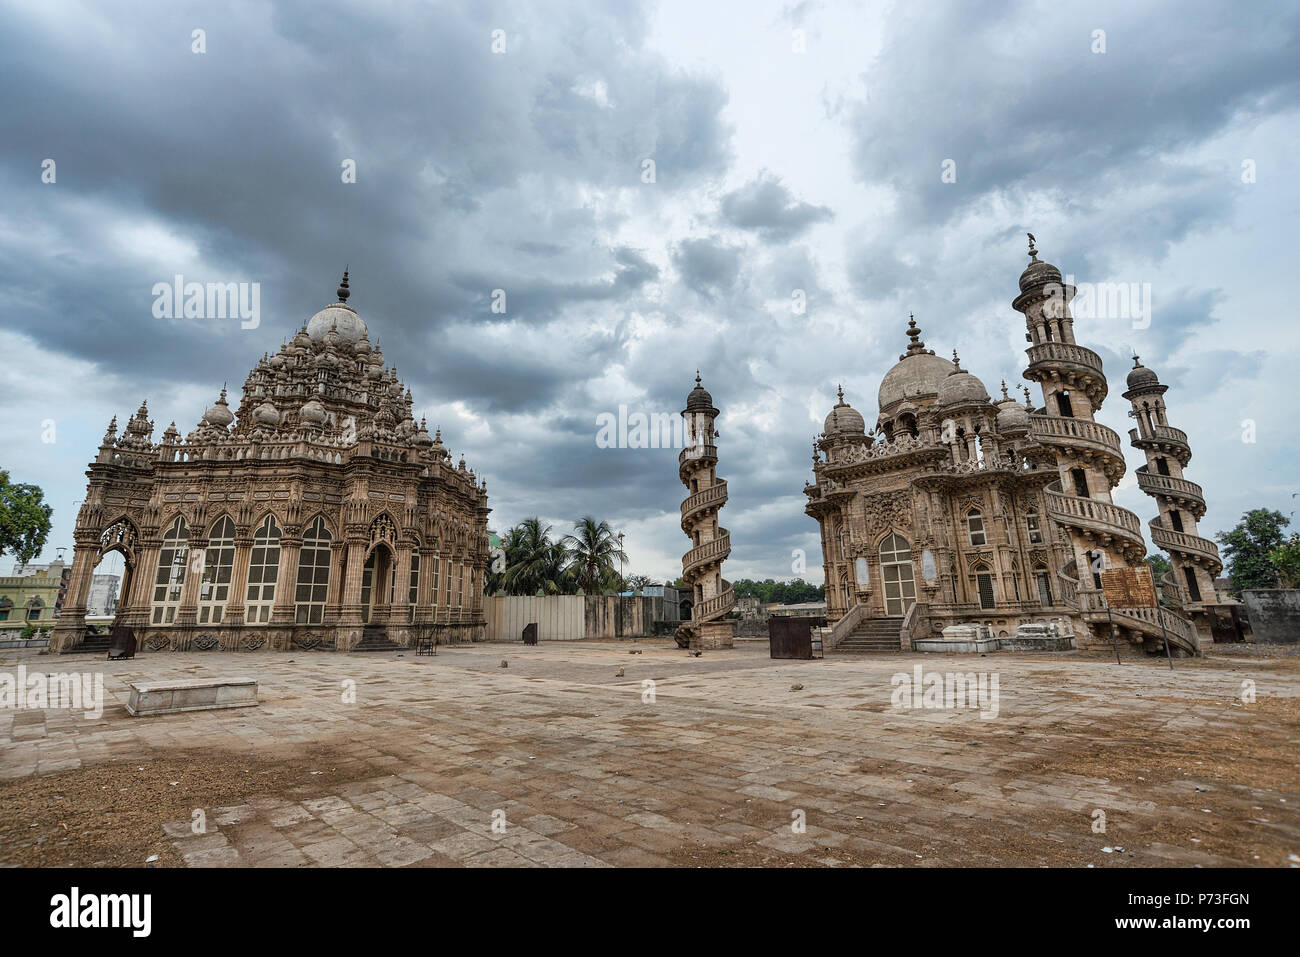 Wide angle images of Mahabat Maqbara a tomb of Mughal times, a neglected heritage architecture monument at Junagadh, Gujarat, India - dramatic clouds Stock Photo